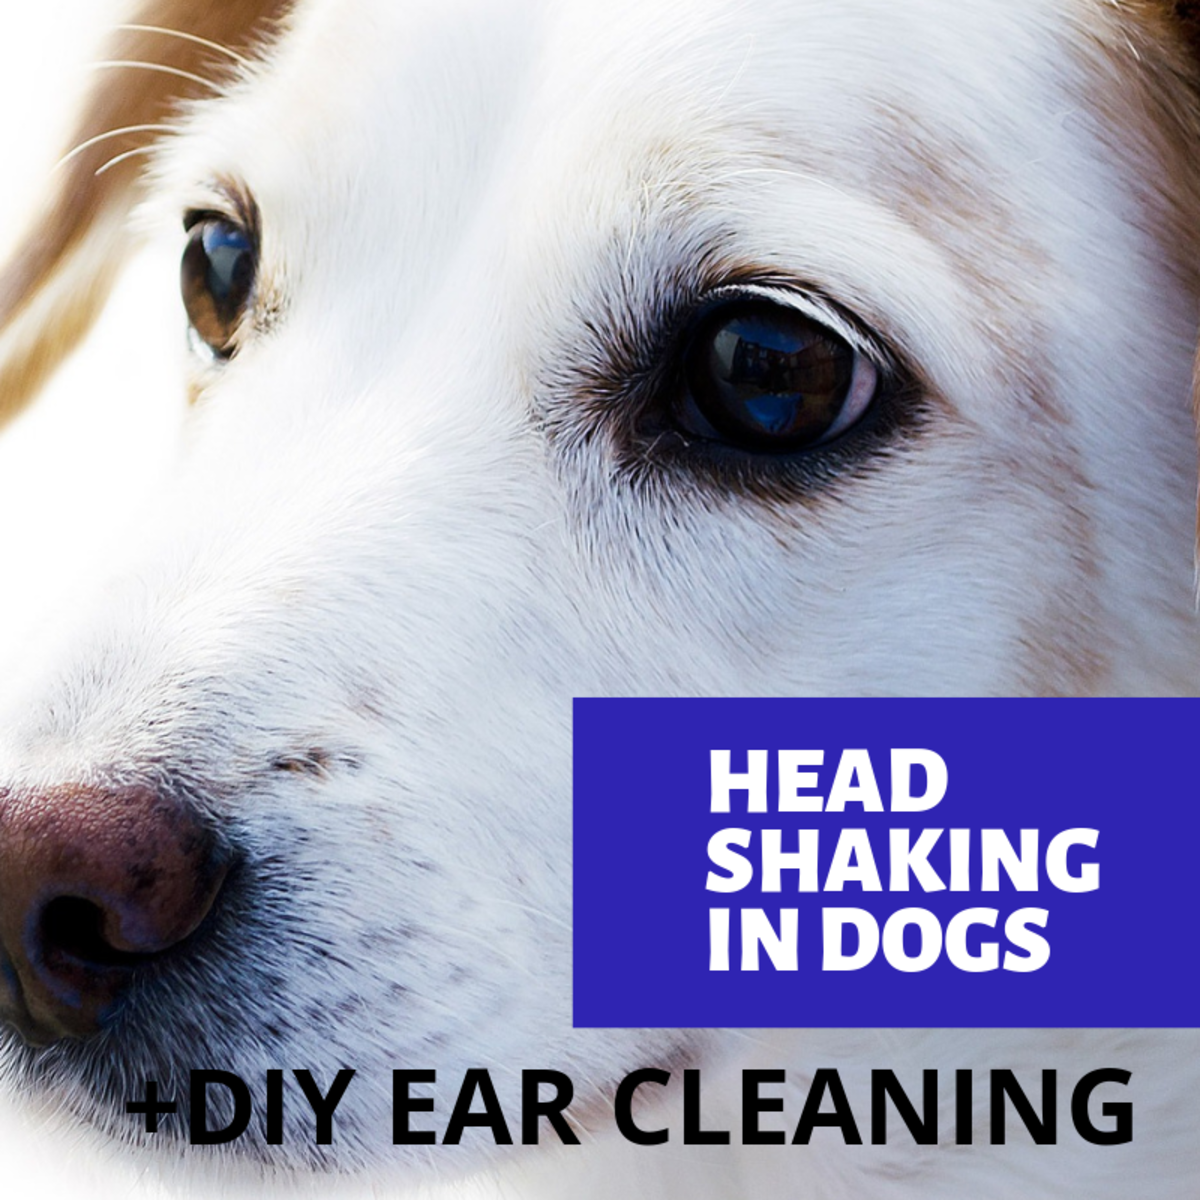 Hematoma Swollen Dog Ear Flap and How to Treat It